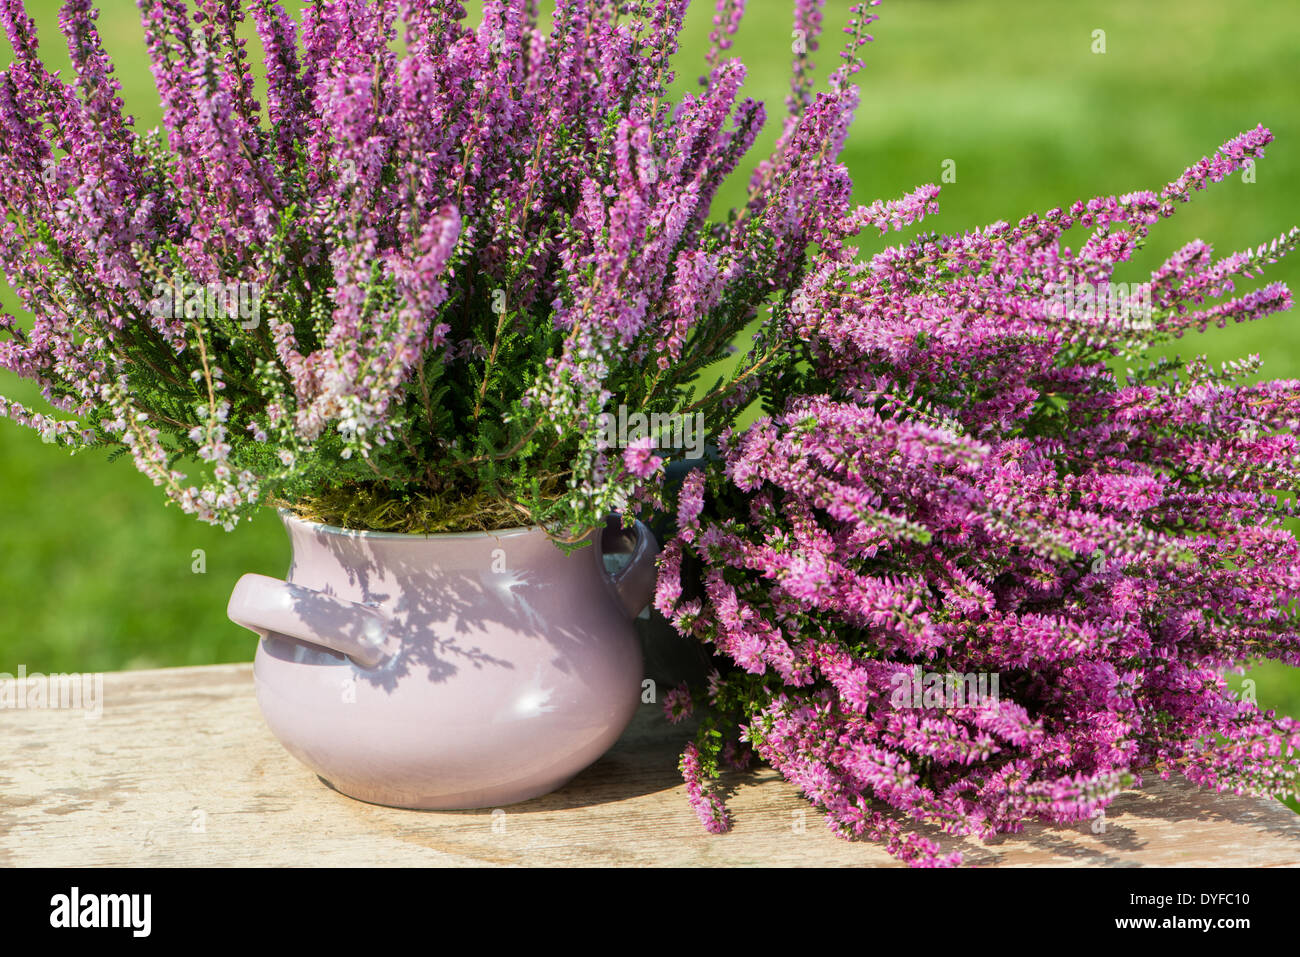 Moorland herb on wooden background Stock Photo